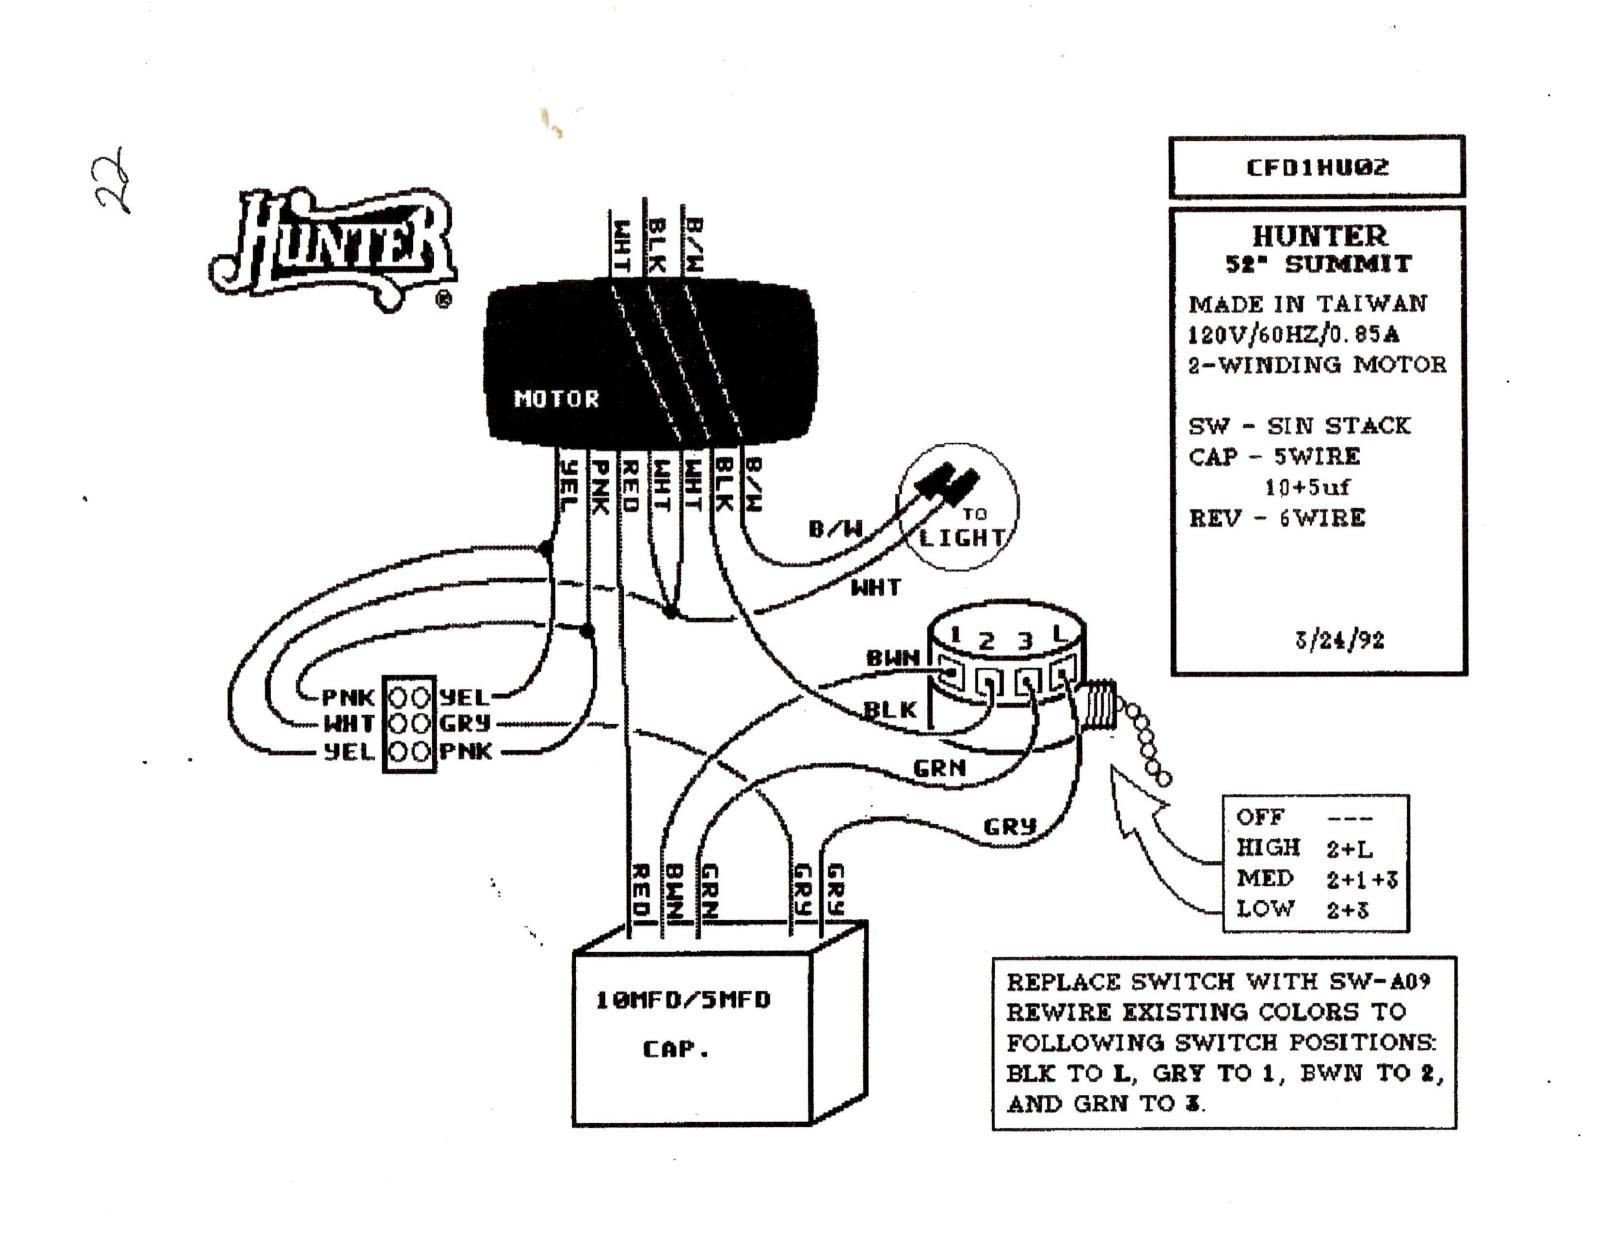 Wiring Diagram For Ceiling Fan Switch New Hunter Ceiling Fan Speed Switch Wiring Diagram